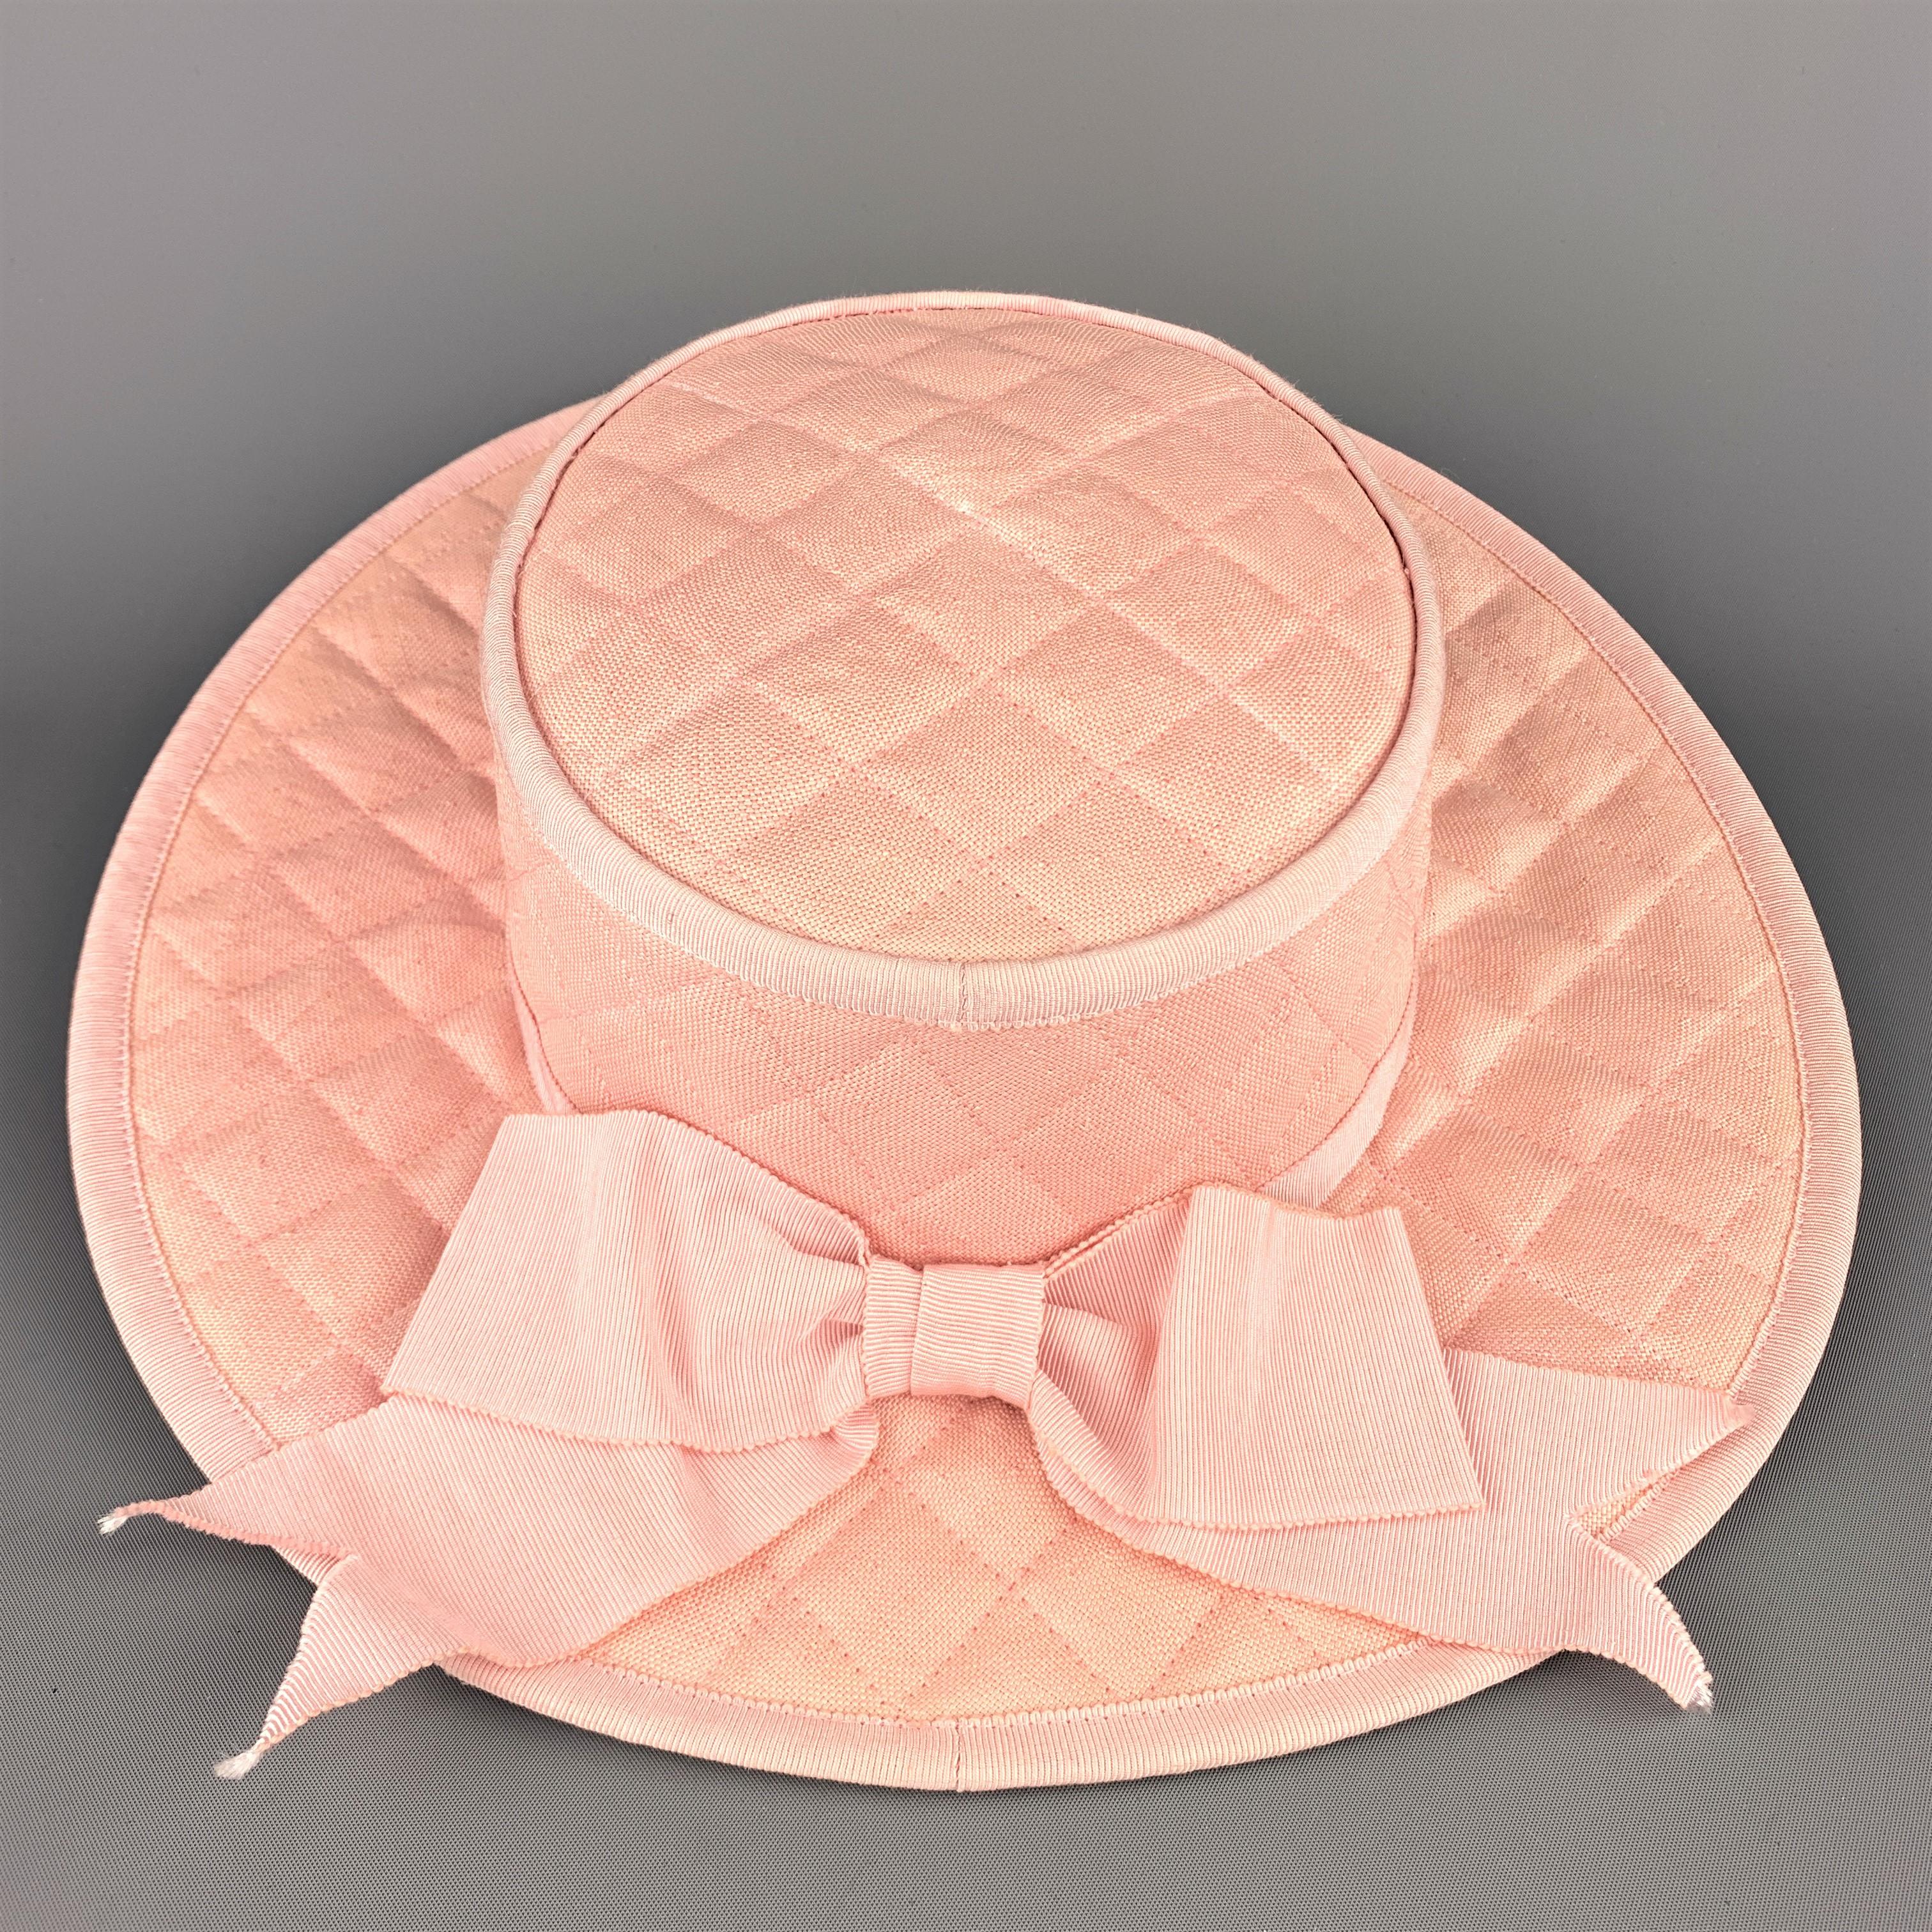 Vintage CHANEL flat top dress sun hat comes in muted pink woven quilted cotton  with grosgrain piping, flat top, and ribbon with bow. Mint exterior with inner discoloration. With original box.
 
Excellent Pre-Owned Condition.
Marked: 57
